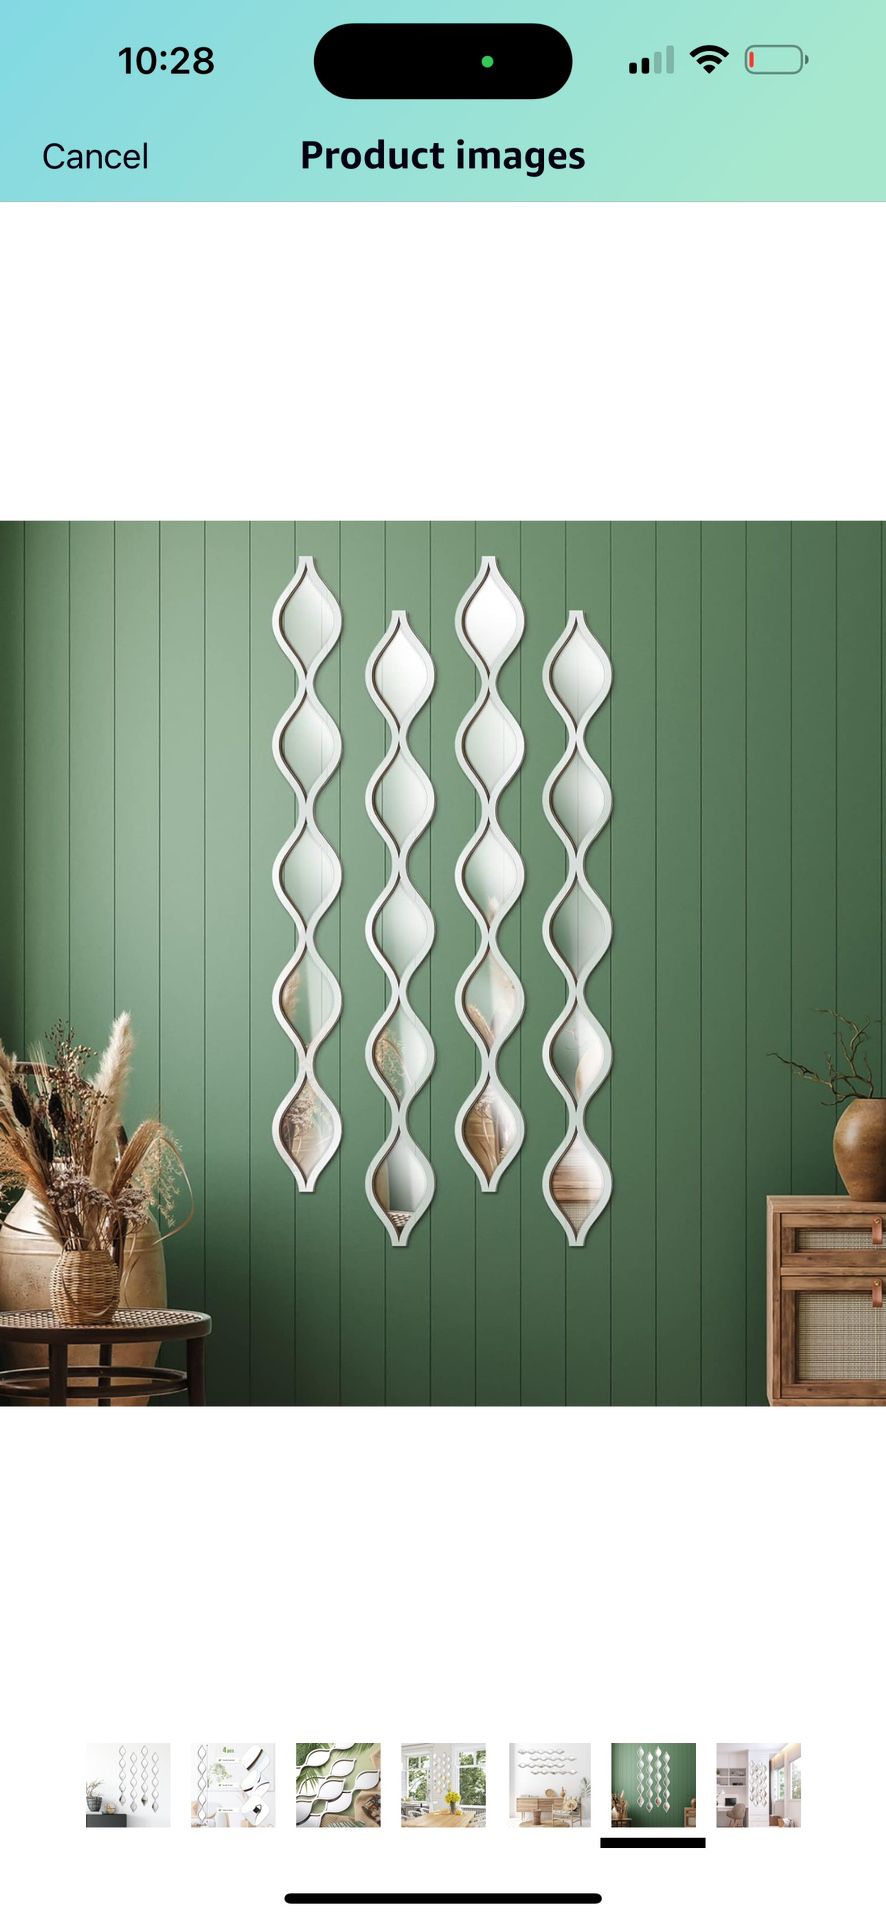 Qunclay Teardrop Mirror Wall Art, Silver, 4 Pcs, 90 x 10.2 cm, Acrylic and Wood Backing, Reflective Surface, Stylish Design, Easy Installation $35